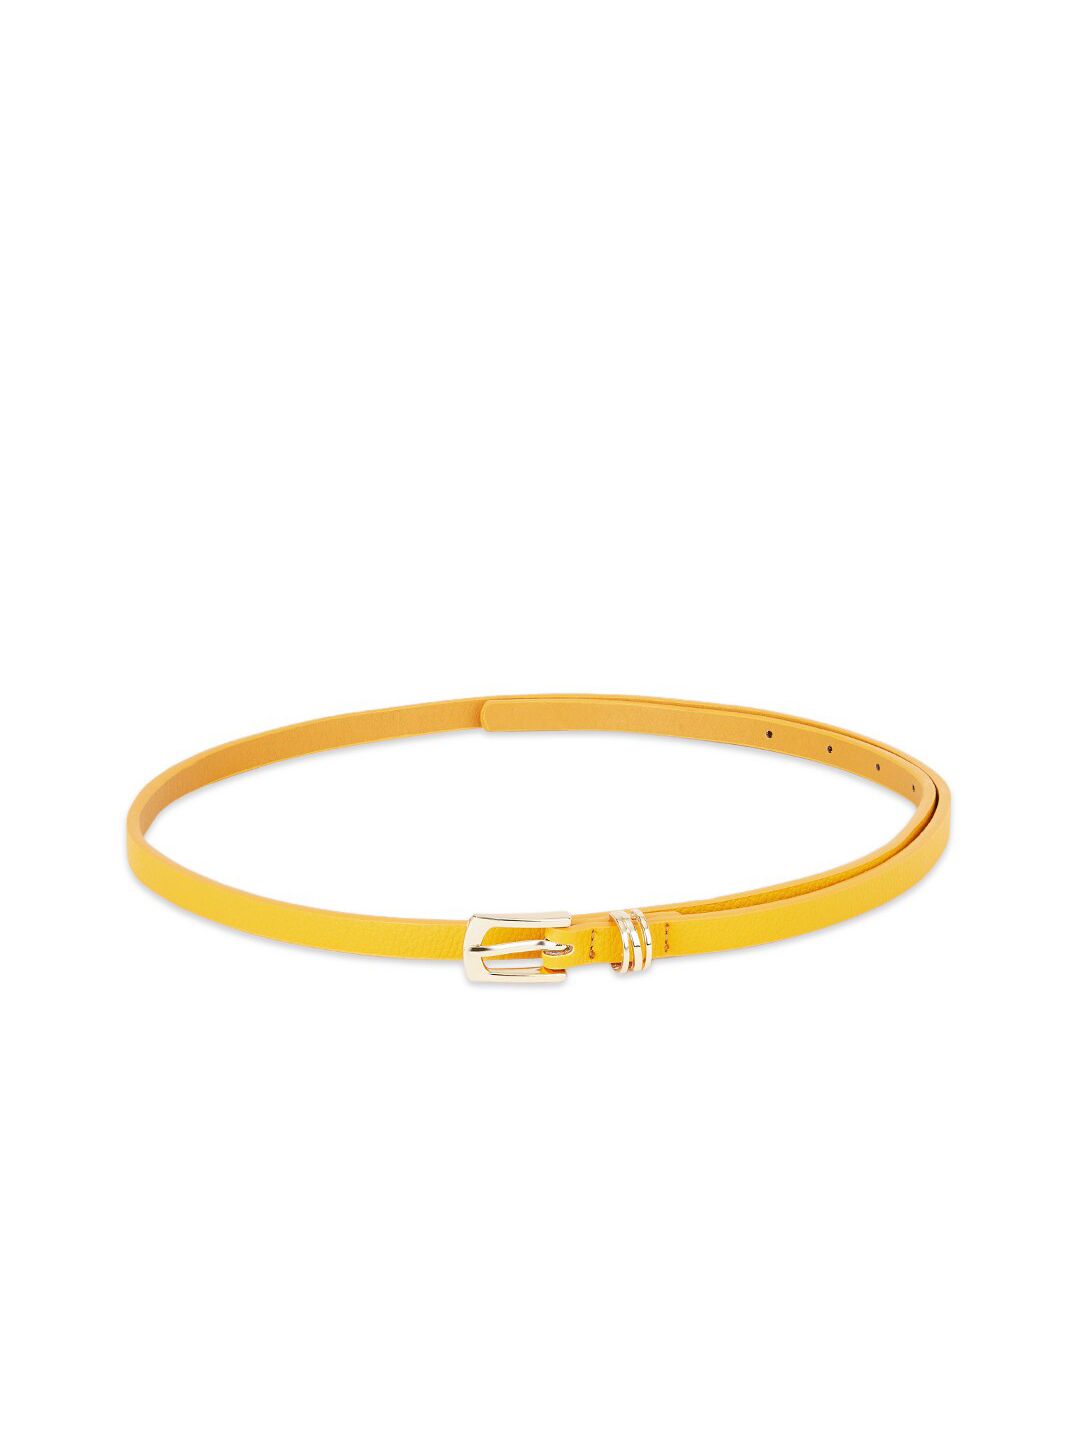 Forever Glam by Pantaloons Women Mustard Textured PU Belt Price in India